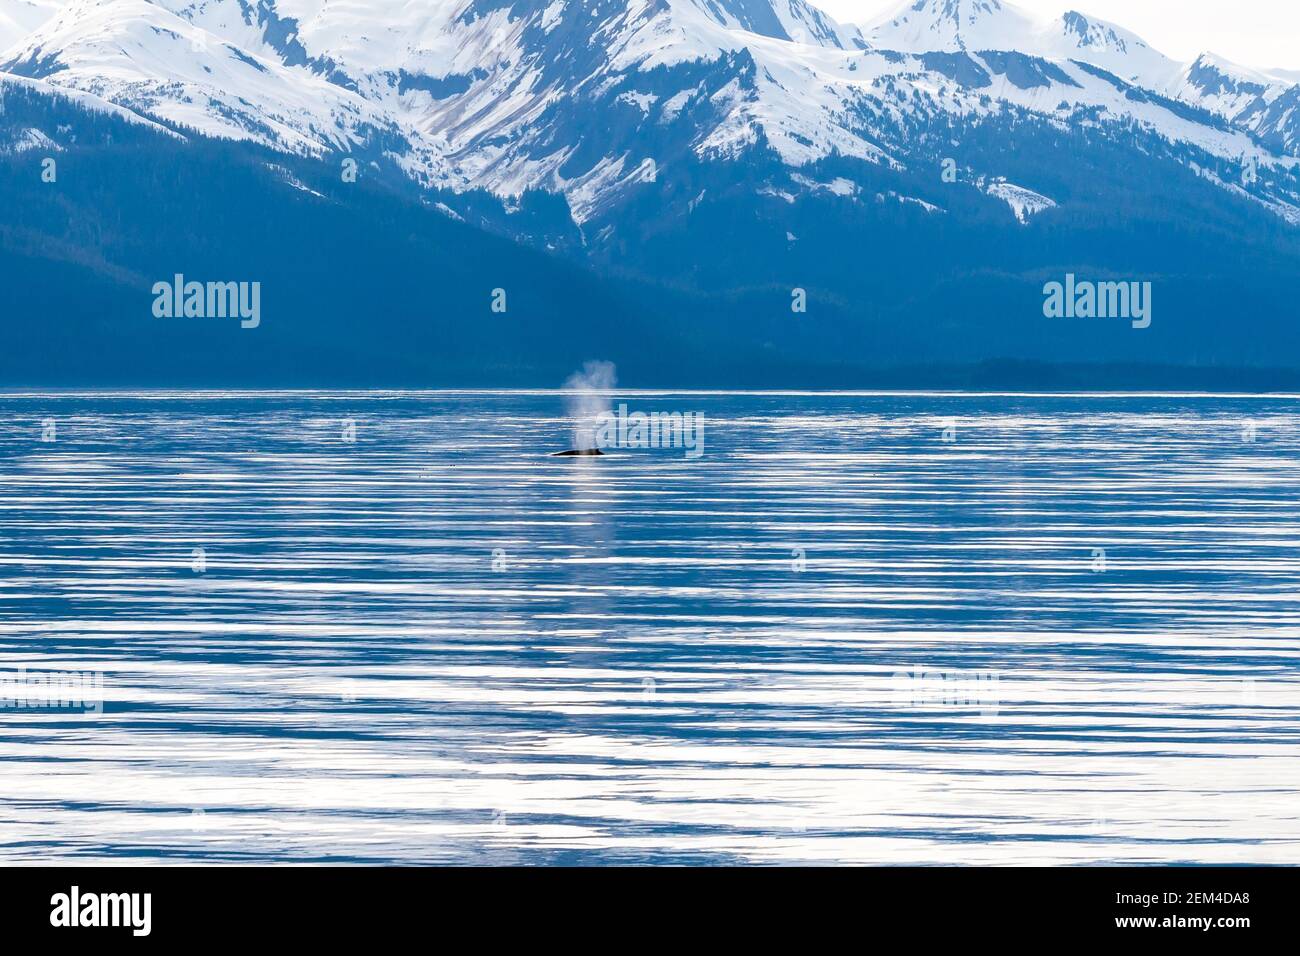 The blow of a Humpback Whale (Megaptera novaeangliae) surfacing off the coast of Alaska with snow-capped mountains in the background Stock Photo